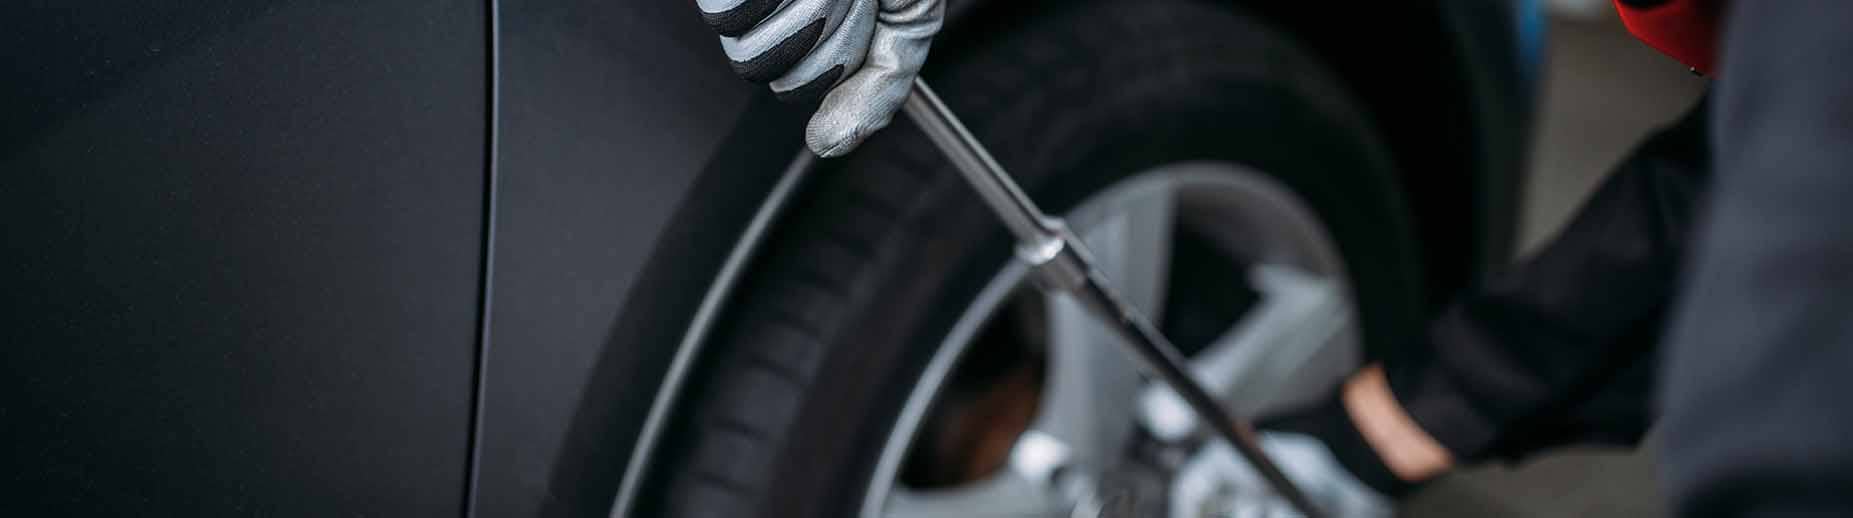 Lowell Tire Balancing Services, Tire Rotation and Tire Repair